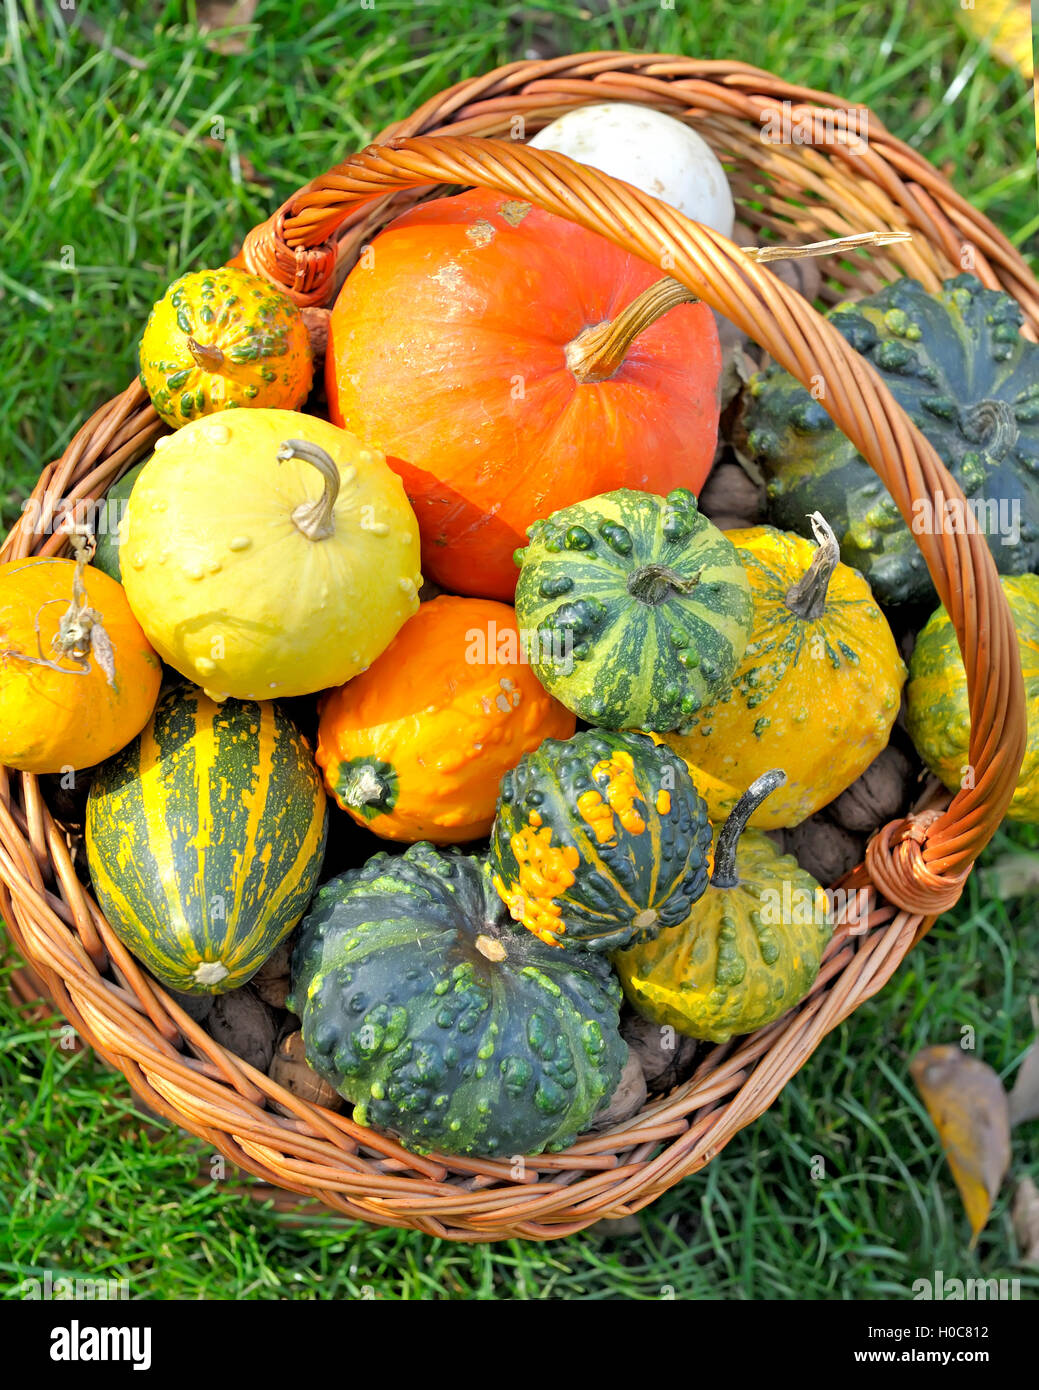 basket with different types of pumpkins Stock Photo